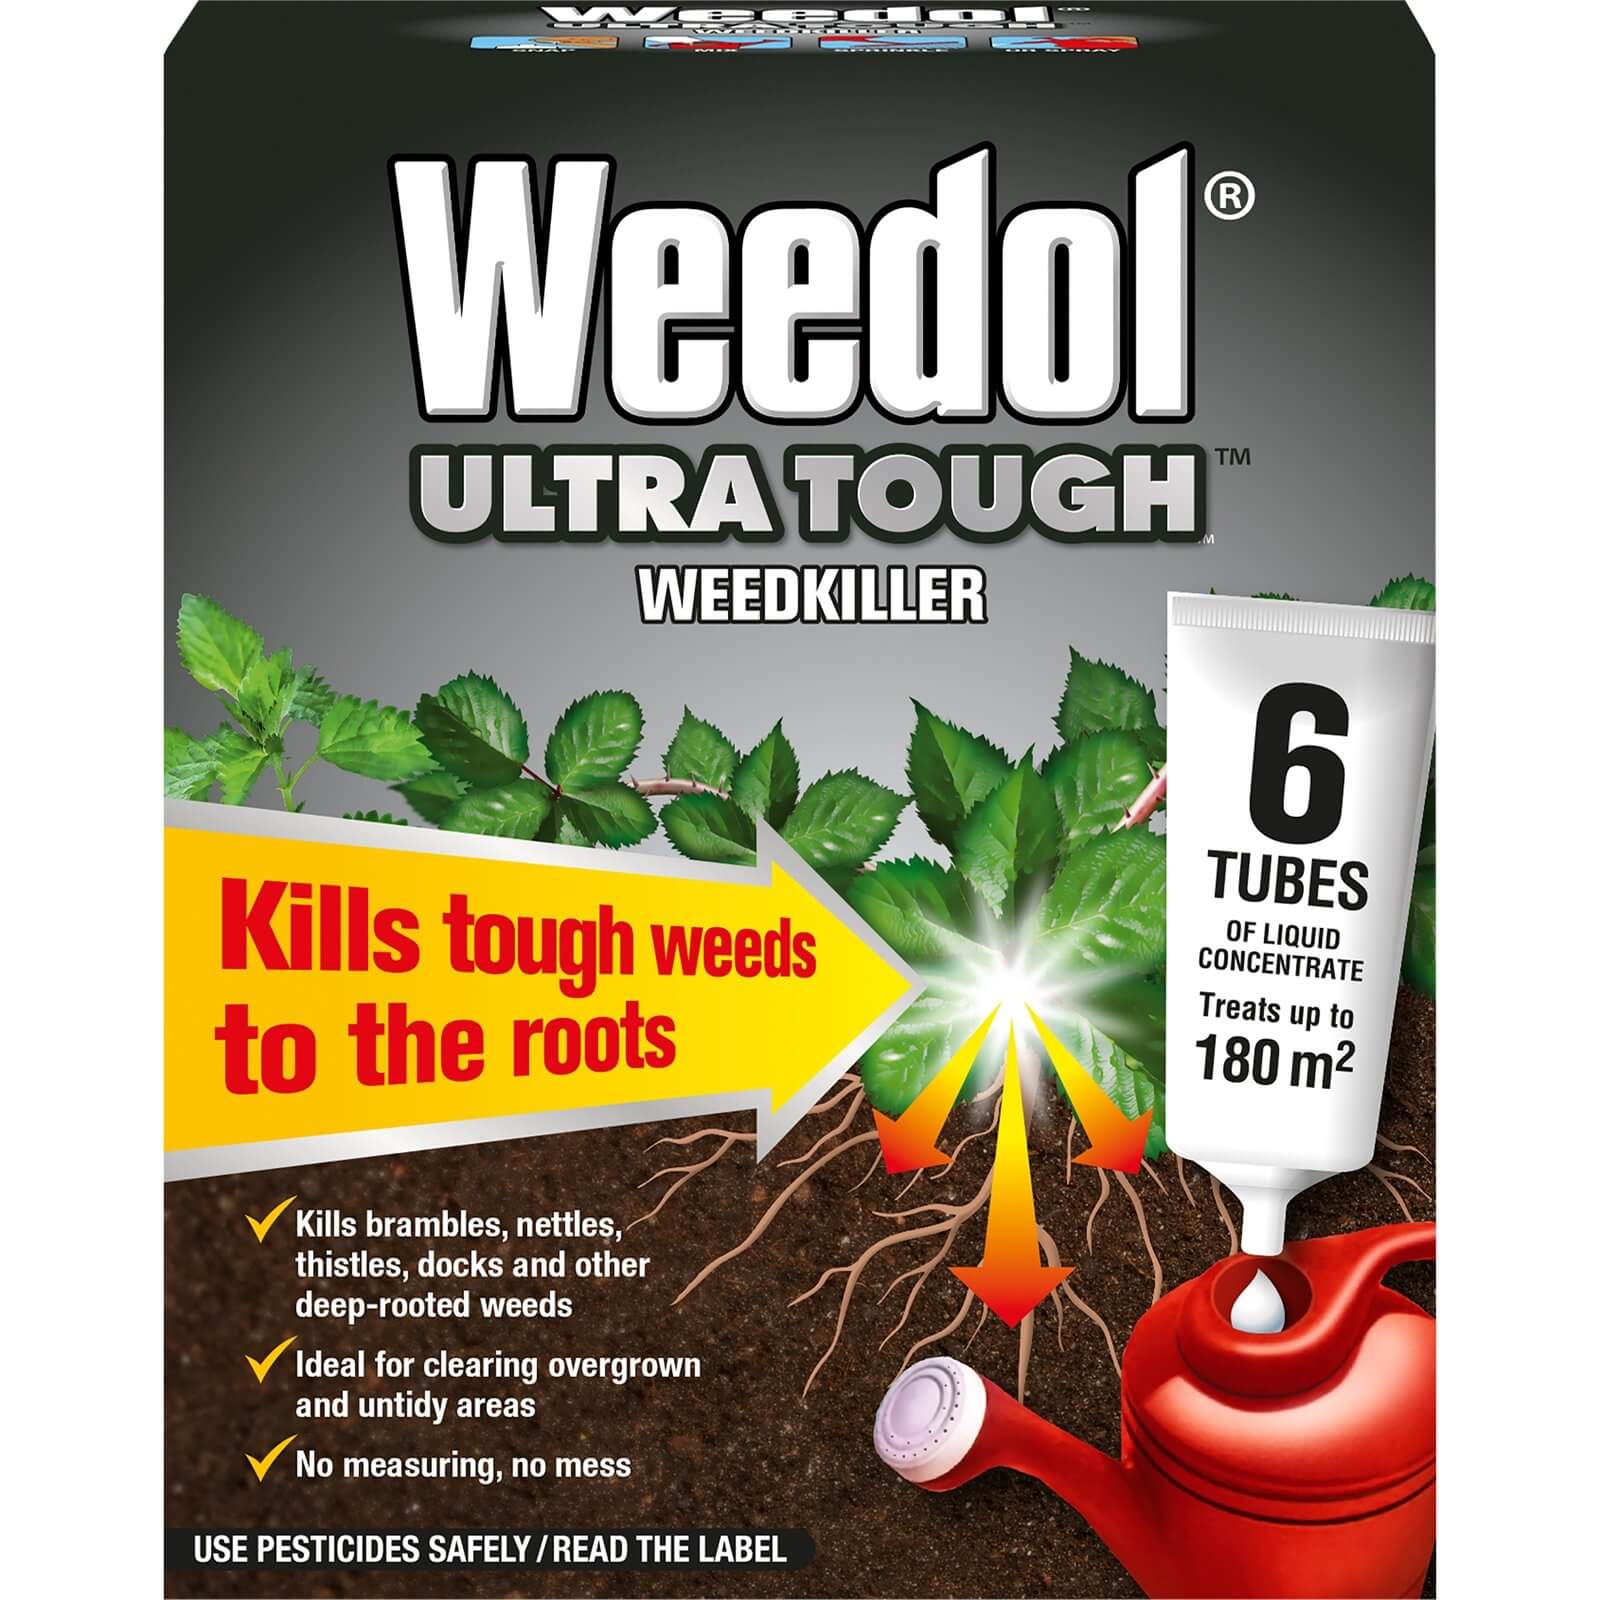 Weedol Ultra Tough Liquid Concentrate Weedkiller - 6 Tubes